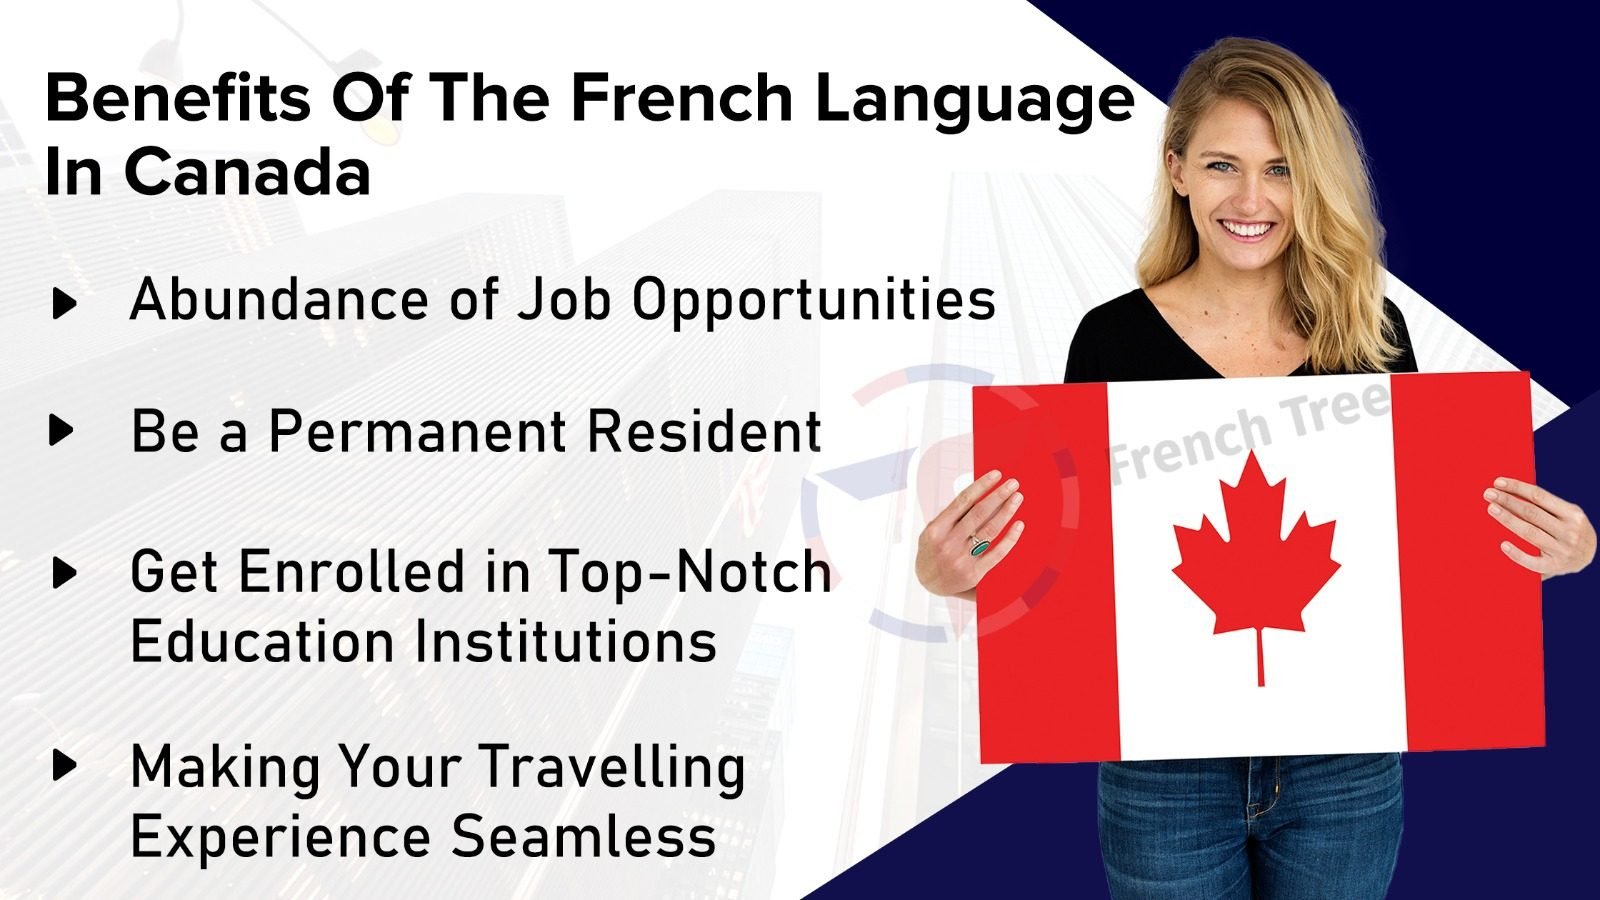 Benefits of the French Language in Canada